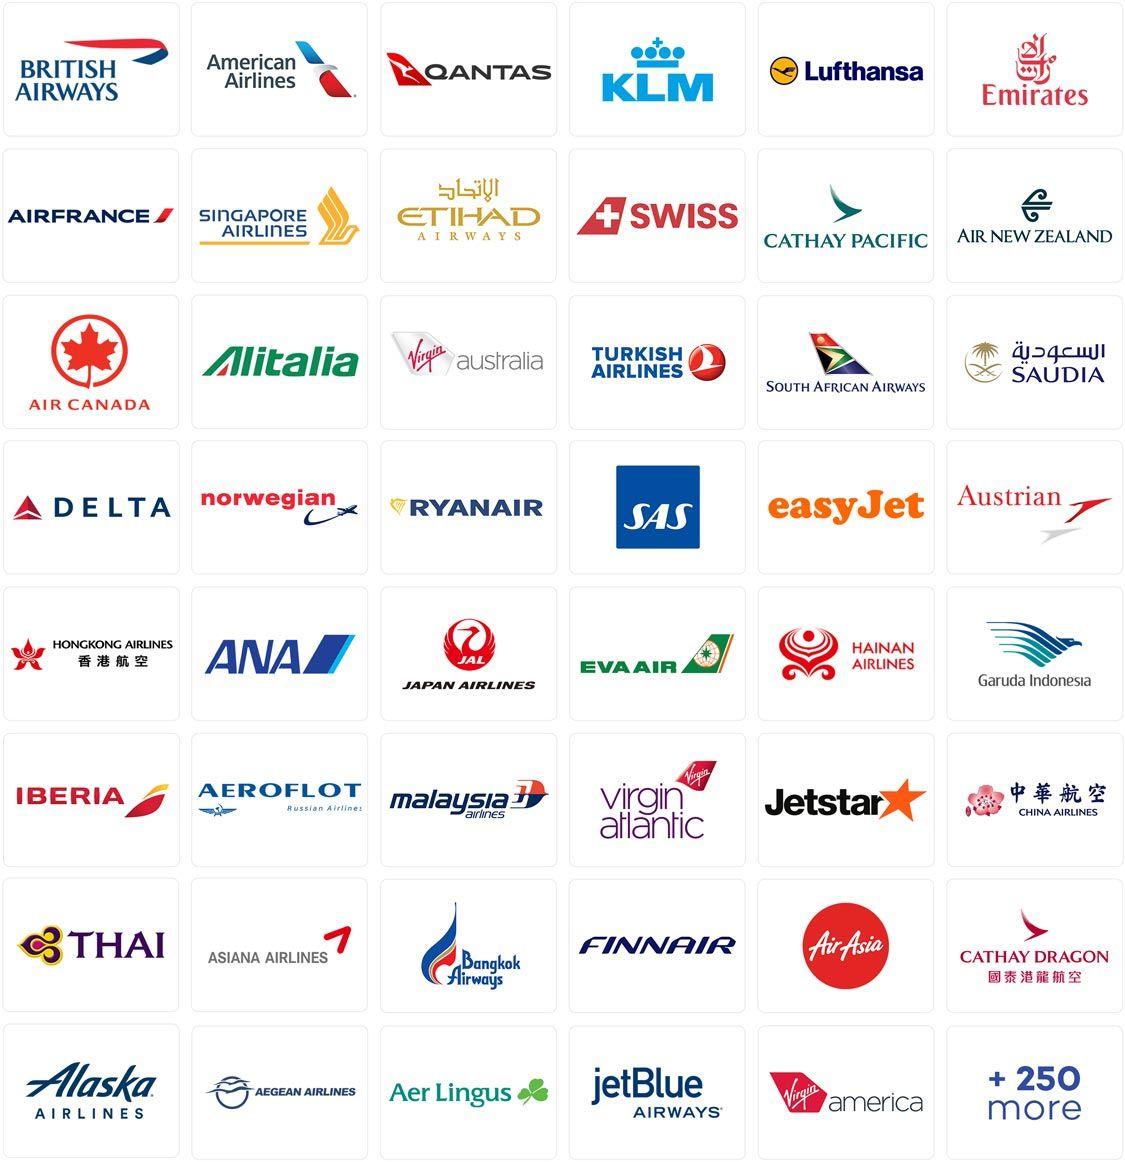 Airline of This European Country Logo - The #1 flight gift card for over 300 airlines worldwide | Flightgiftcard